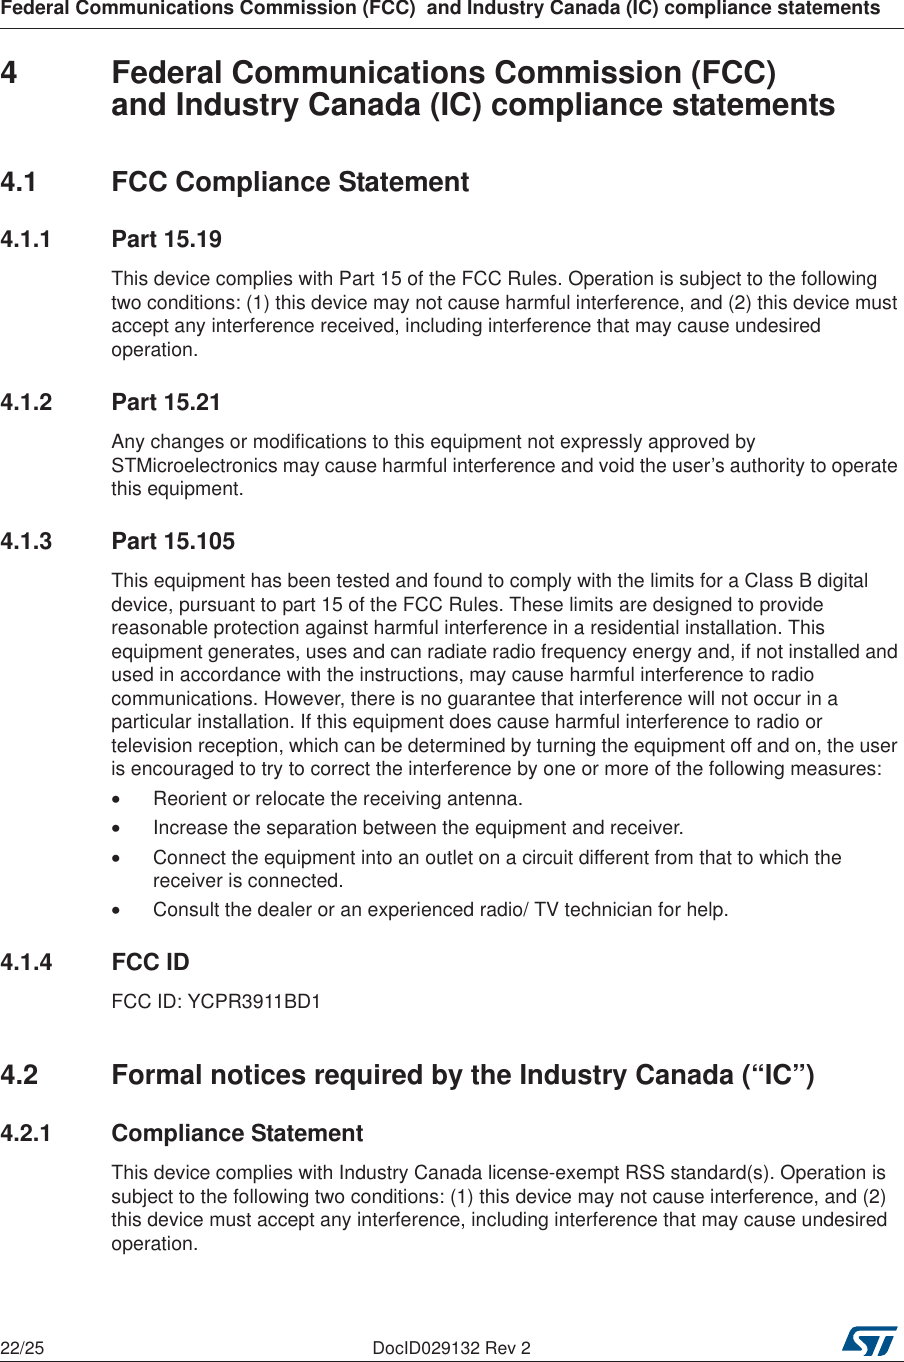 Federal Communications Commission (FCC)  and Industry Canada (IC) compliance statements22/25 DocID029132 Rev 24  Federal Communications Commission (FCC) and Industry Canada (IC) compliance statements4.1  FCC Compliance Statement4.1.1 Part 15.19This device complies with Part 15 of the FCC Rules. Operation is subject to the following two conditions: (1) this device may not cause harmful interference, and (2) this device must accept any interference received, including interference that may cause undesired operation.4.1.2 Part 15.21Any changes or modifications to this equipment not expressly approved by STMicroelectronics may cause harmful interference and void the user’s authority to operate this equipment.4.1.3 Part 15.105This equipment has been tested and found to comply with the limits for a Class B digital device, pursuant to part 15 of the FCC Rules. These limits are designed to provide reasonable protection against harmful interference in a residential installation. This equipment generates, uses and can radiate radio frequency energy and, if not installed and used in accordance with the instructions, may cause harmful interference to radio communications. However, there is no guarantee that interference will not occur in a particular installation. If this equipment does cause harmful interference to radio or television reception, which can be determined by turning the equipment off and on, the user is encouraged to try to correct the interference by one or more of the following measures:•Reorient or relocate the receiving antenna.•Increase the separation between the equipment and receiver.•Connect the equipment into an outlet on a circuit different from that to which the receiver is connected.•Consult the dealer or an experienced radio/ TV technician for help.4.1.4 FCC IDFCC ID: YCPR3911BD14.2  Formal notices required by the Industry Canada (“IC”)4.2.1 Compliance StatementThis device complies with Industry Canada license-exempt RSS standard(s). Operation is subject to the following two conditions: (1) this device may not cause interference, and (2) this device must accept any interference, including interference that may cause undesired operation.